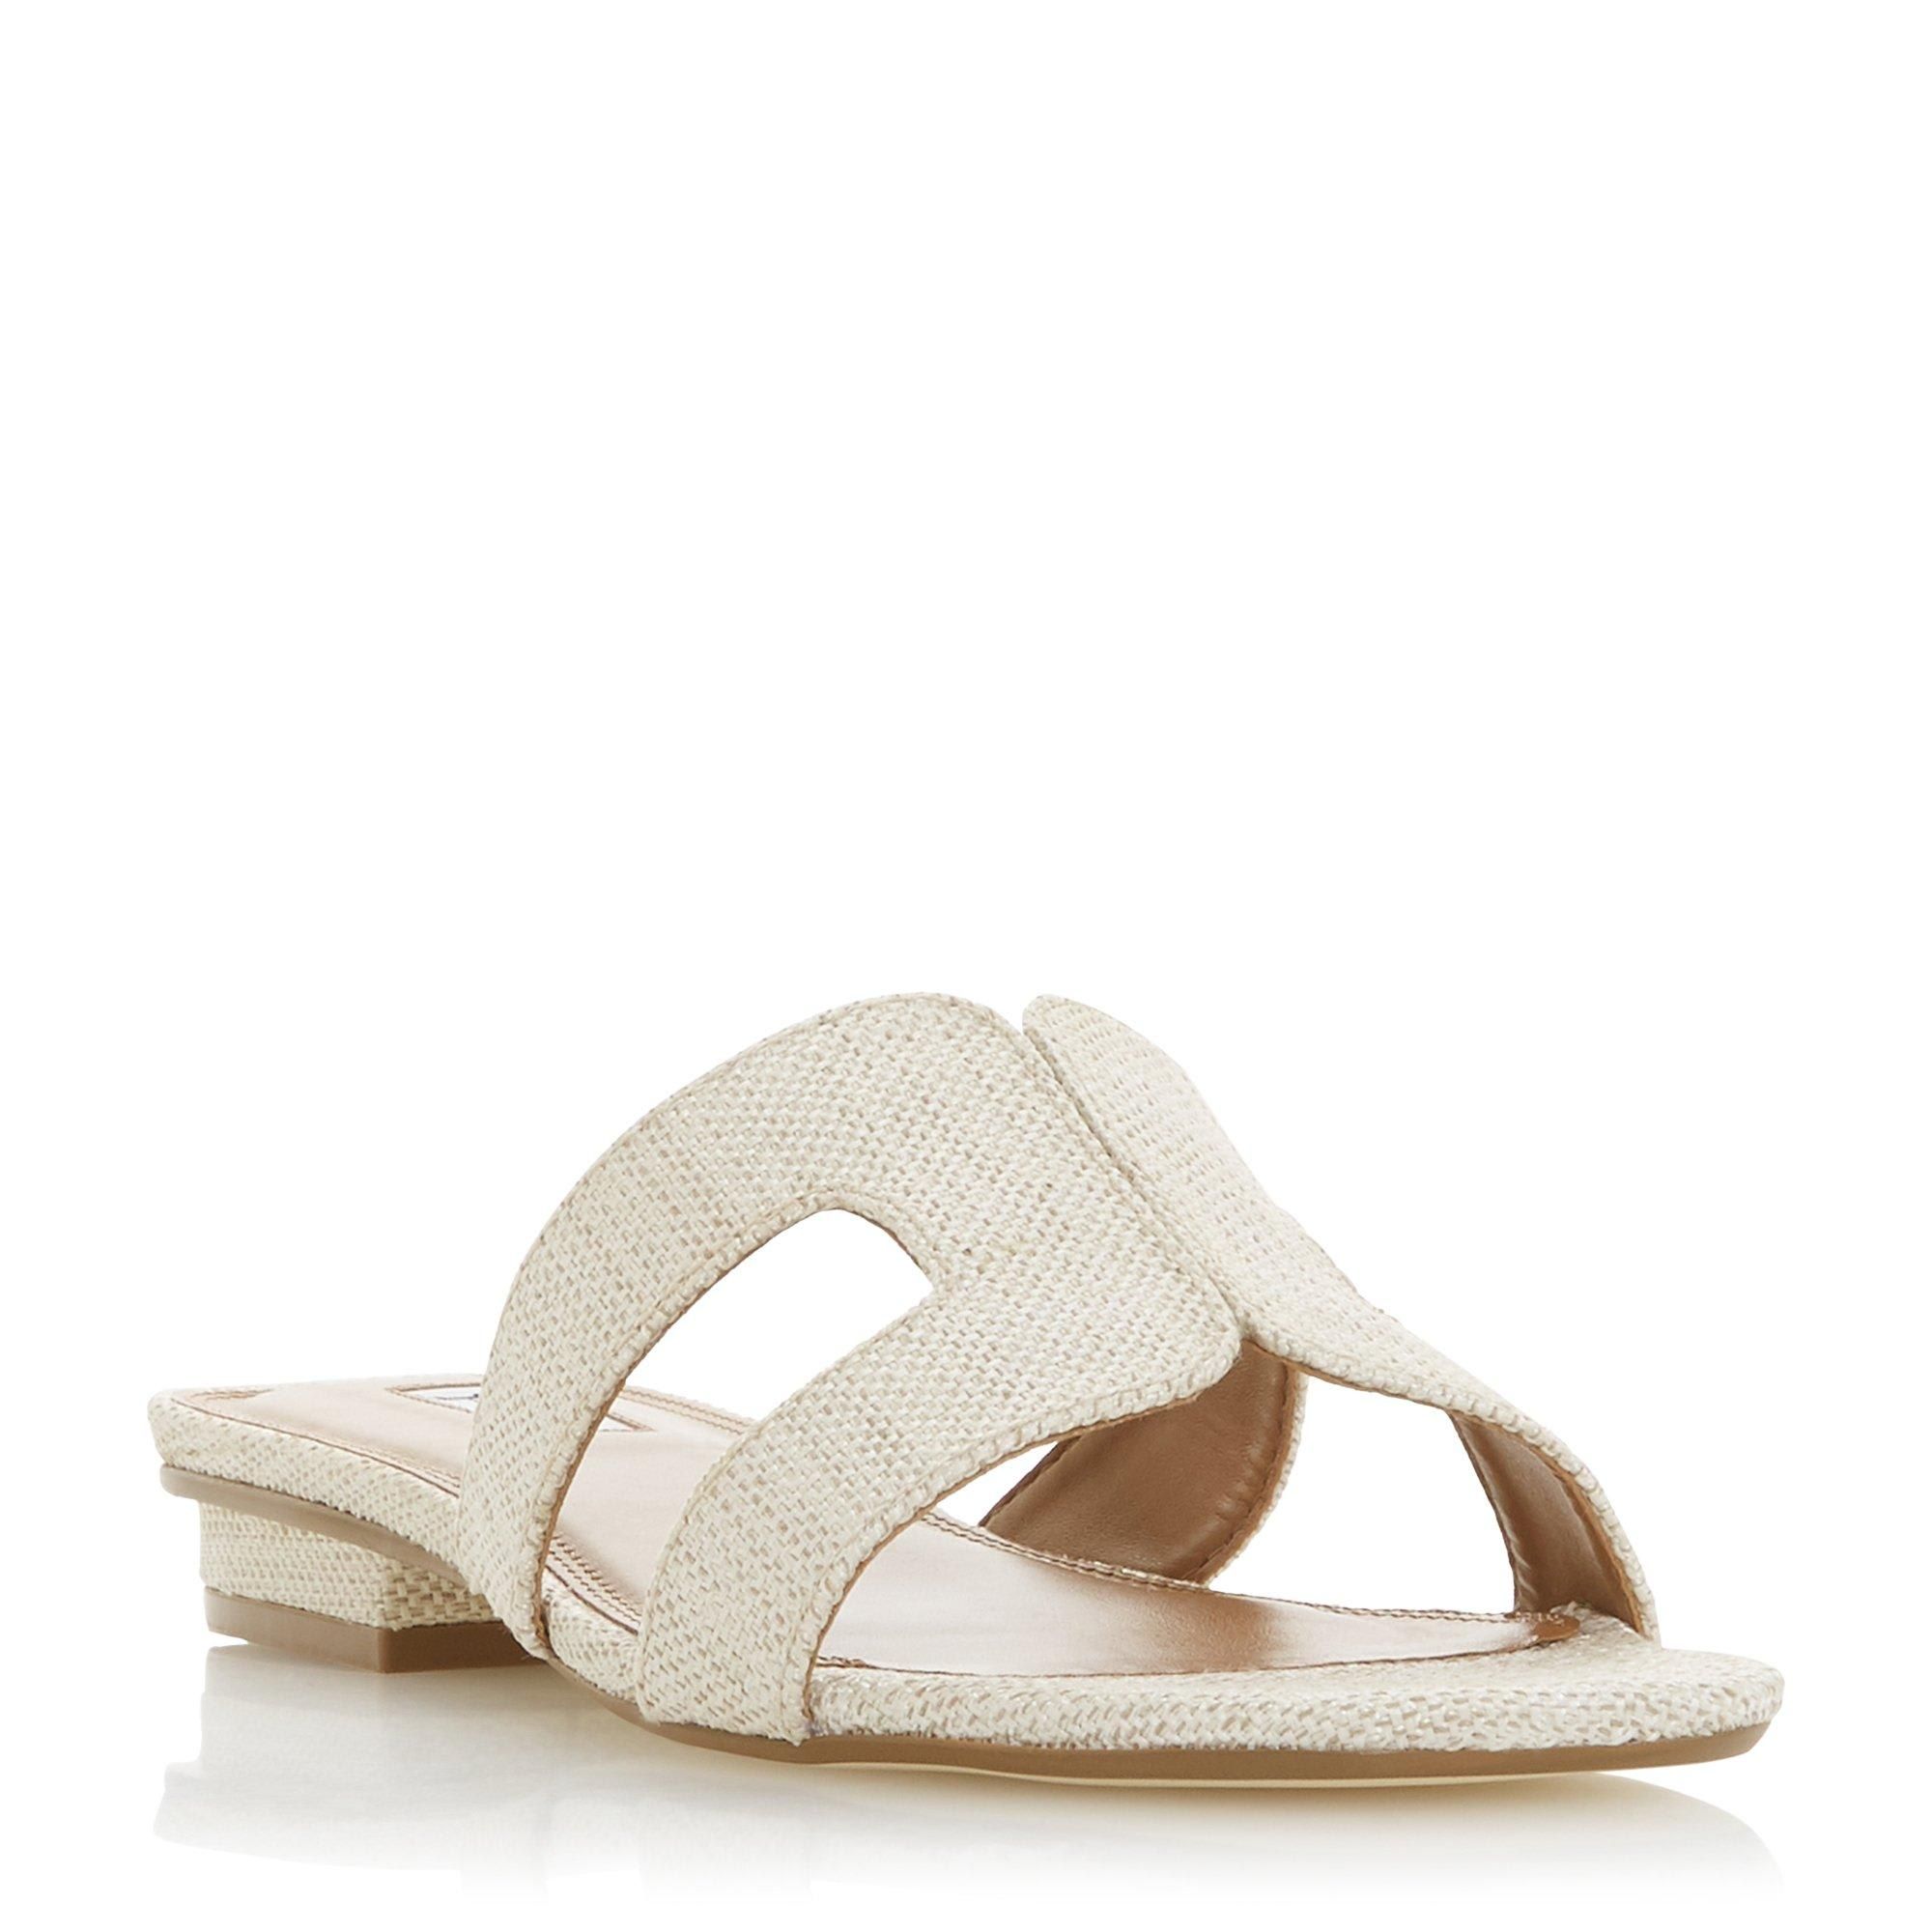 Stay smart and stylish this summer with Dune London's Loupe slider sandal. Featuring a cut out design with contrast stitching and a low block heel. An open sandal toe and resin sole complete the striking shoe.